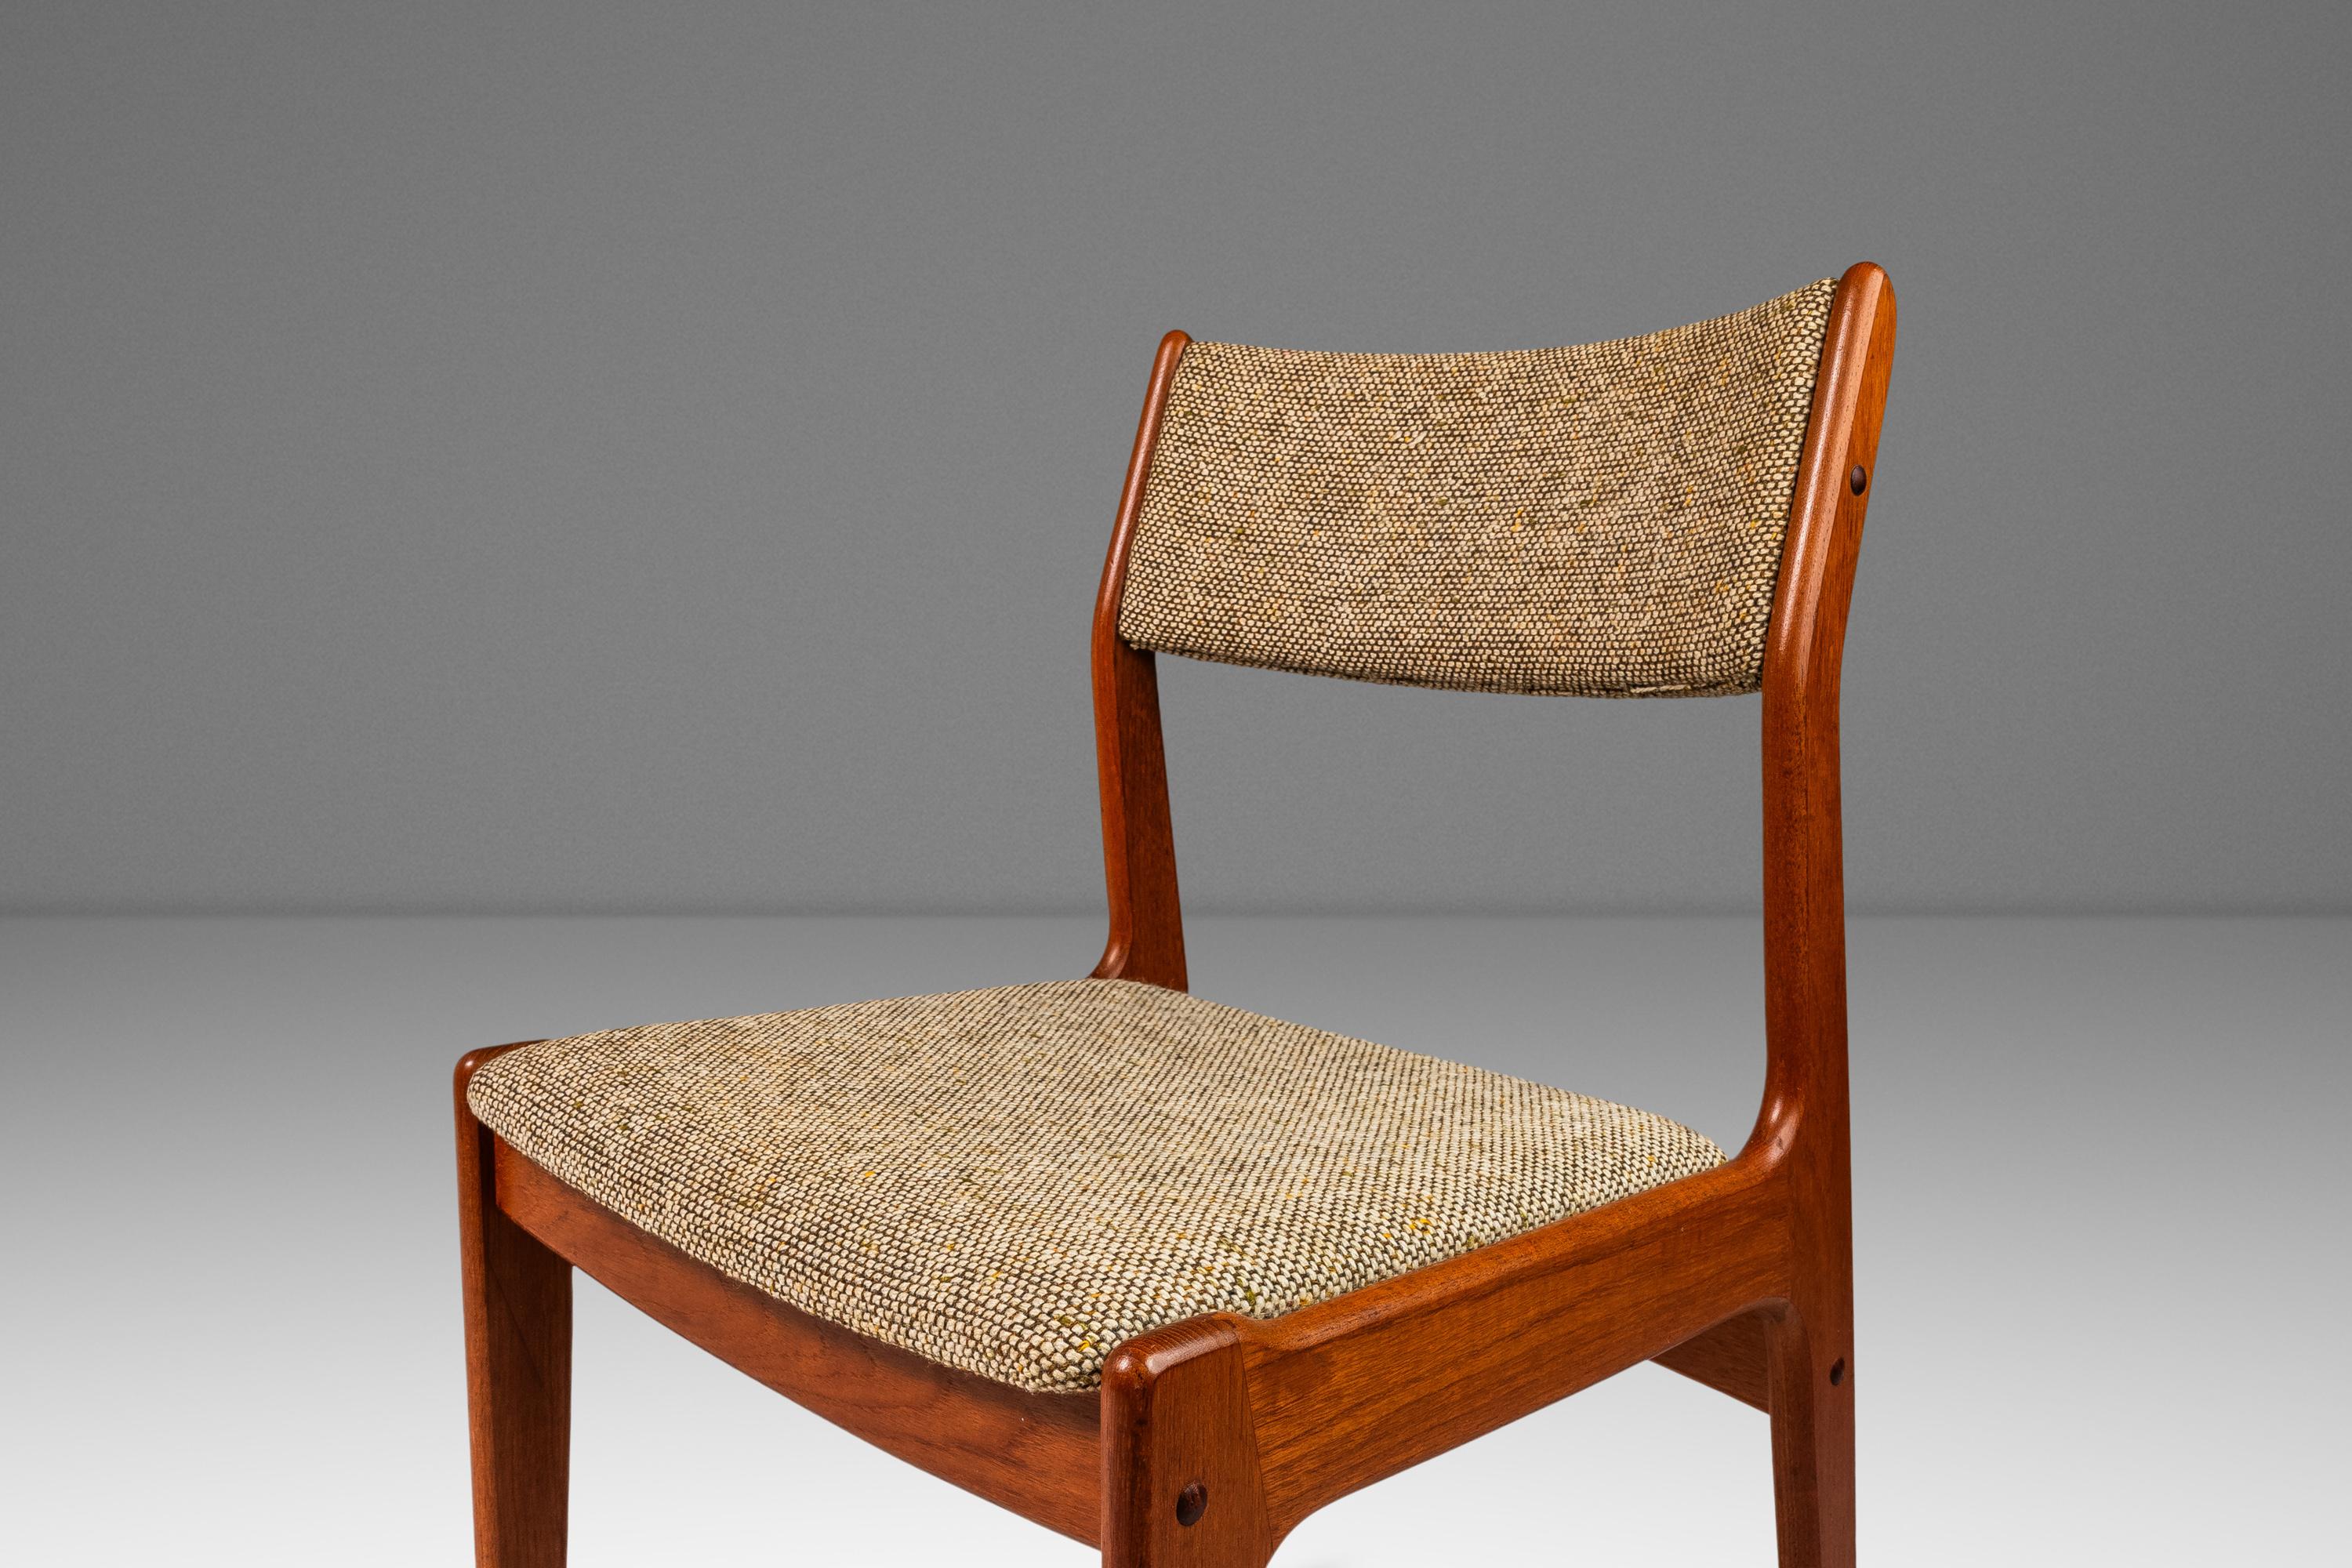 Set of 4 Danish Teak Dining Chairs by D-SCAN, Original Fabric, c. 1970s For Sale 5